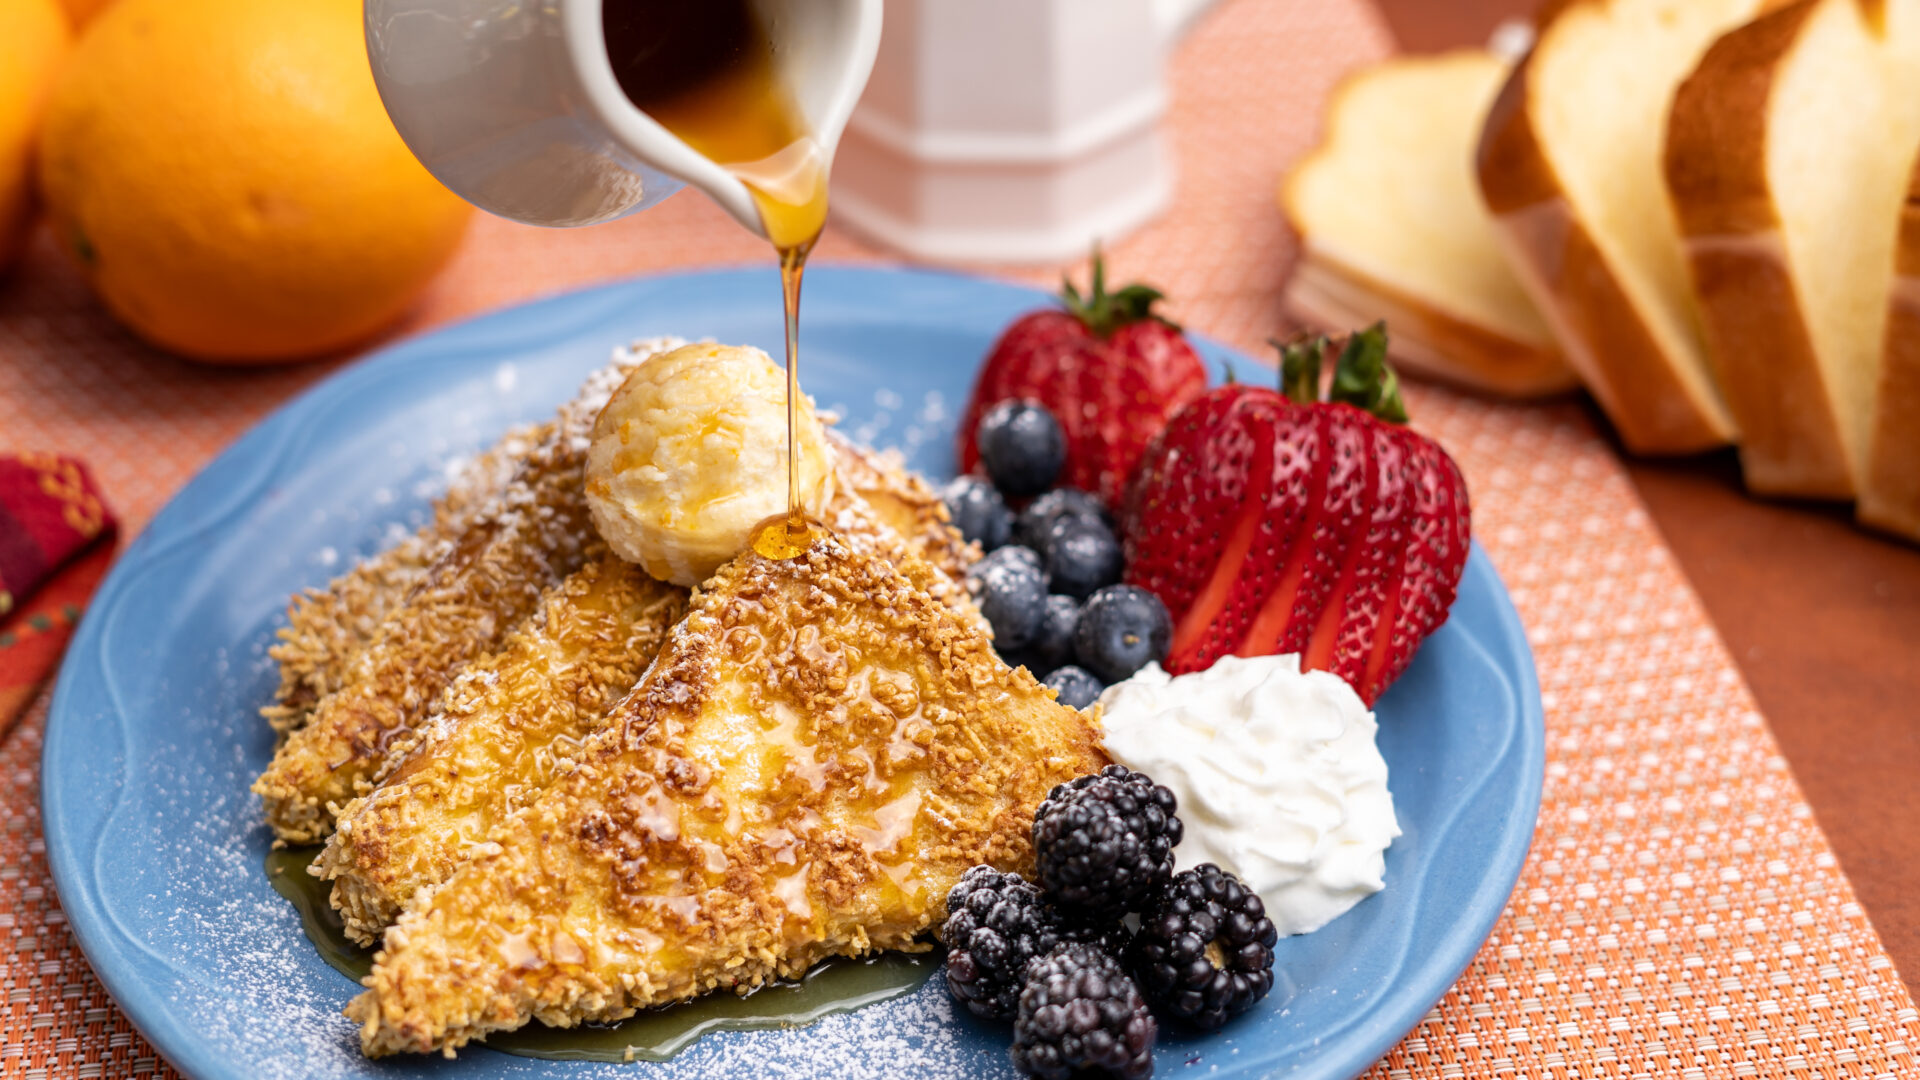 Warm maple syrup being poured onto French Toast with a dollop of orange mascarpone cream and fresh berries